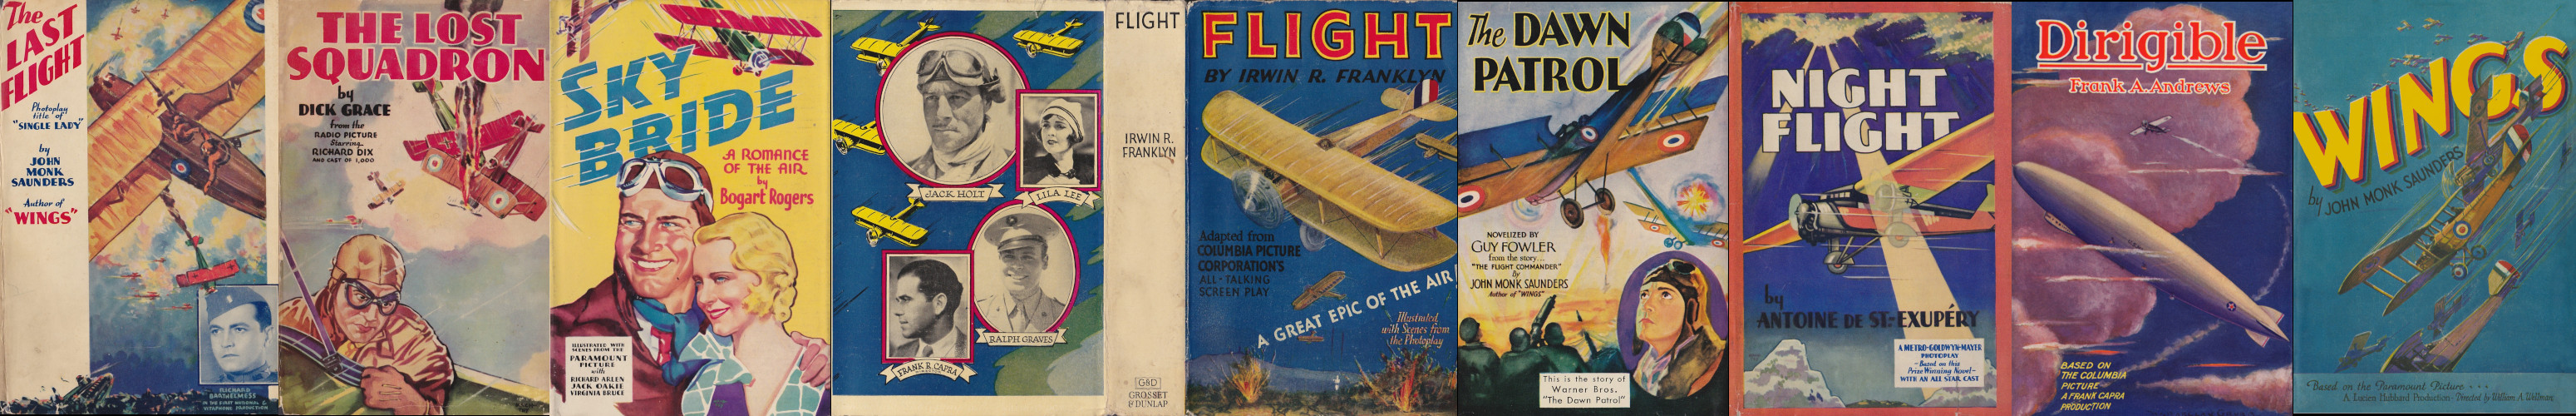 Aviation PhotoPlay Editions Hardcover with Dustjacket